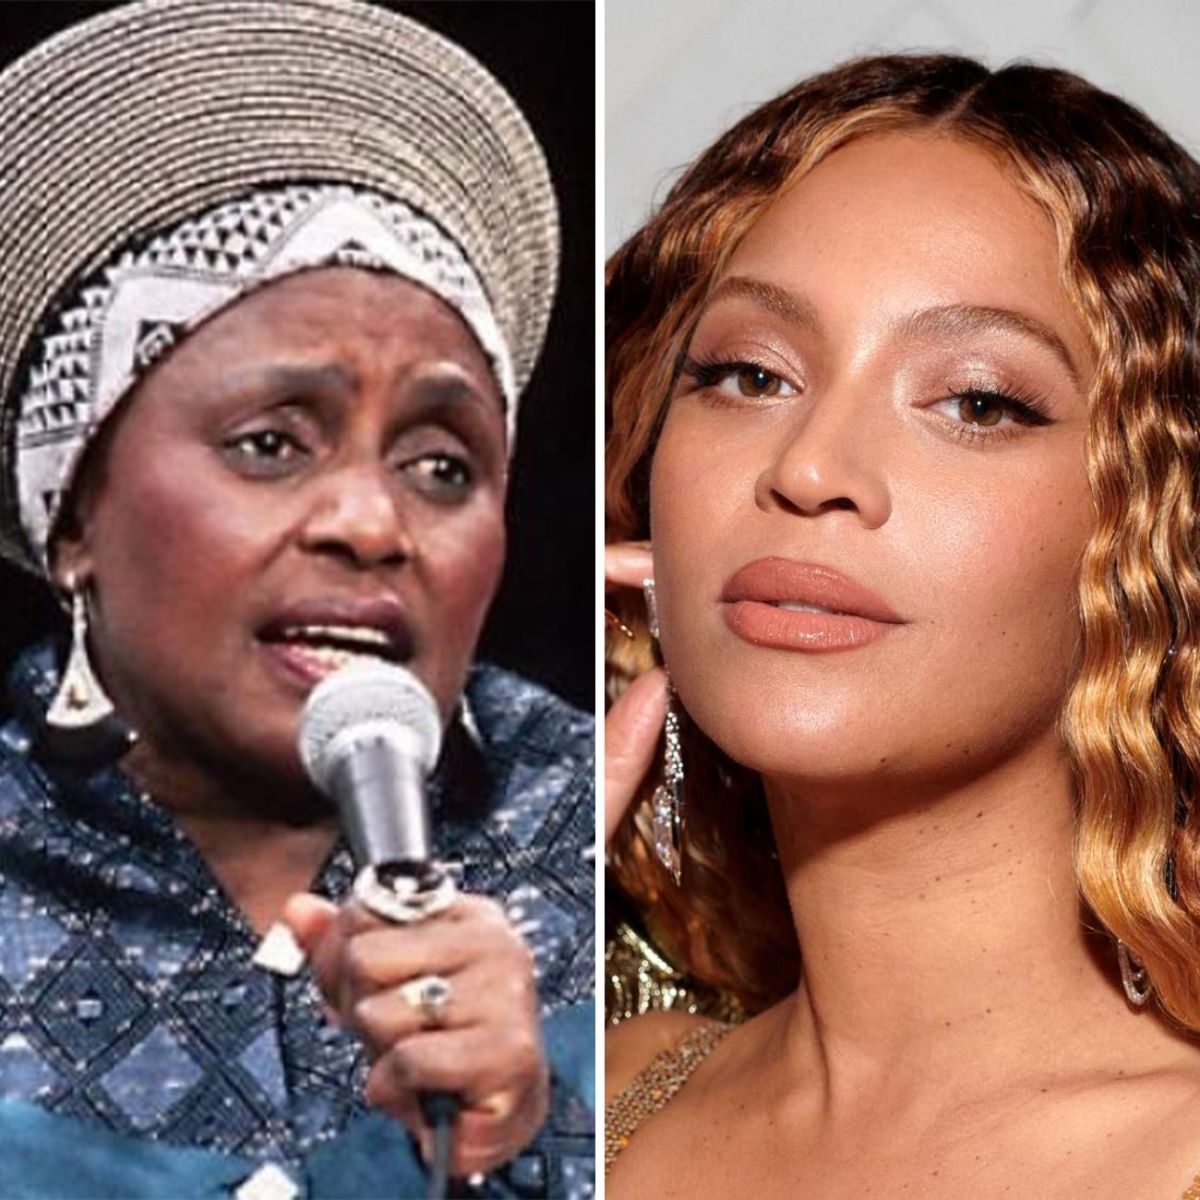 &Quot;Mama Africa&Quot; Title Sparks Heated Debate Among Music Fans On Social Media 7